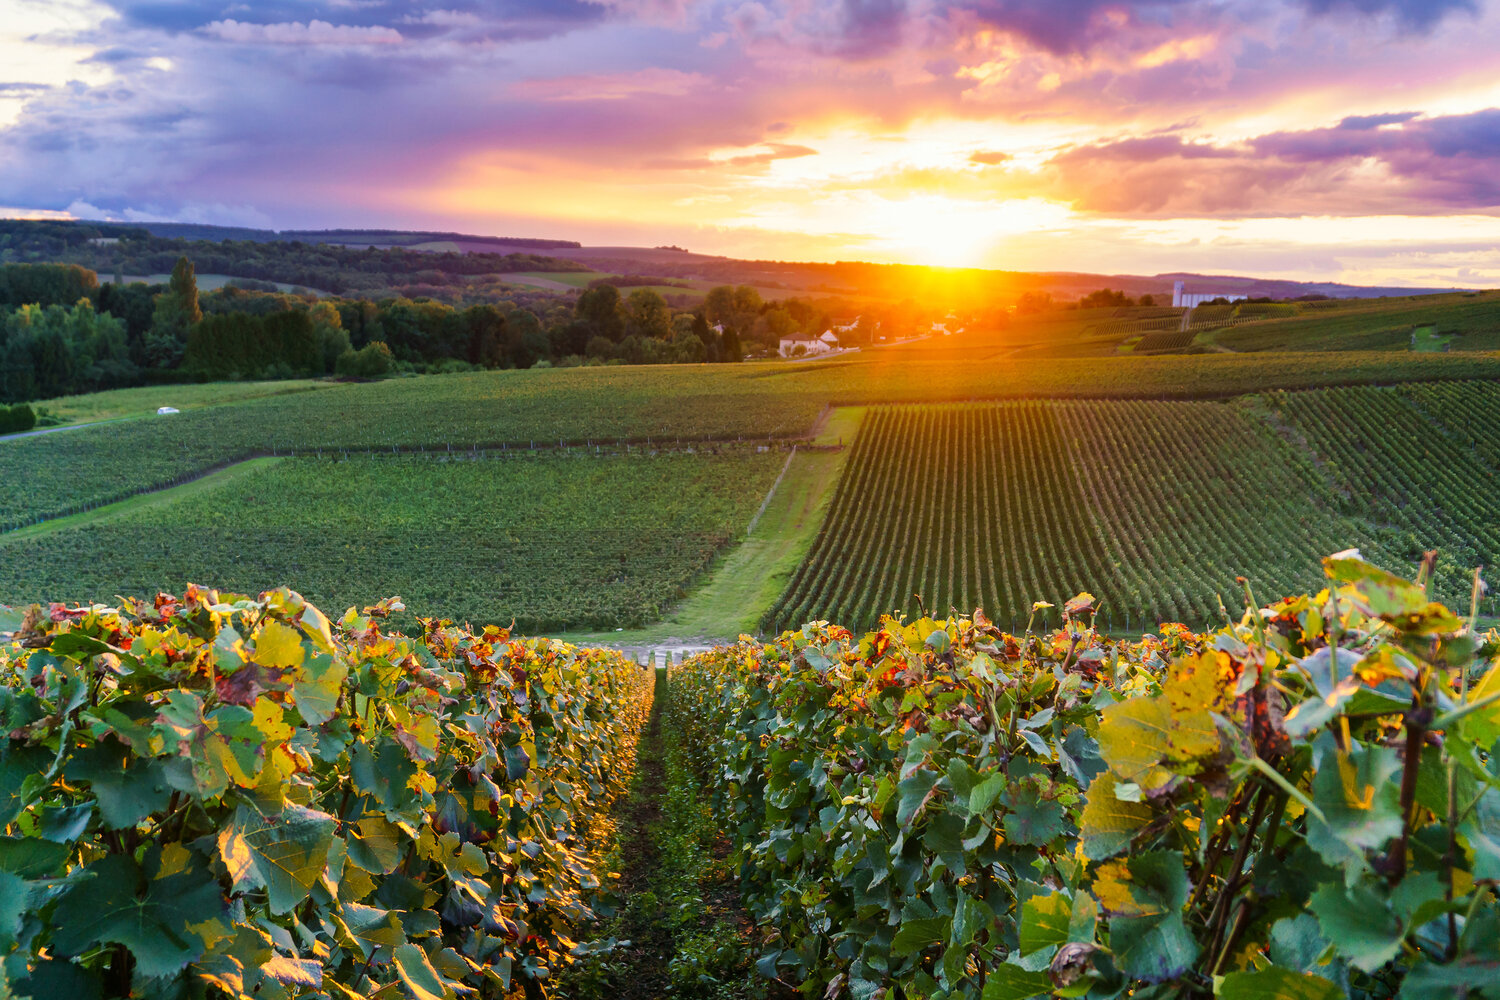 A vineyard in Reims, France, one of the two main cities in Marne, where the country’s Champagne is produced.